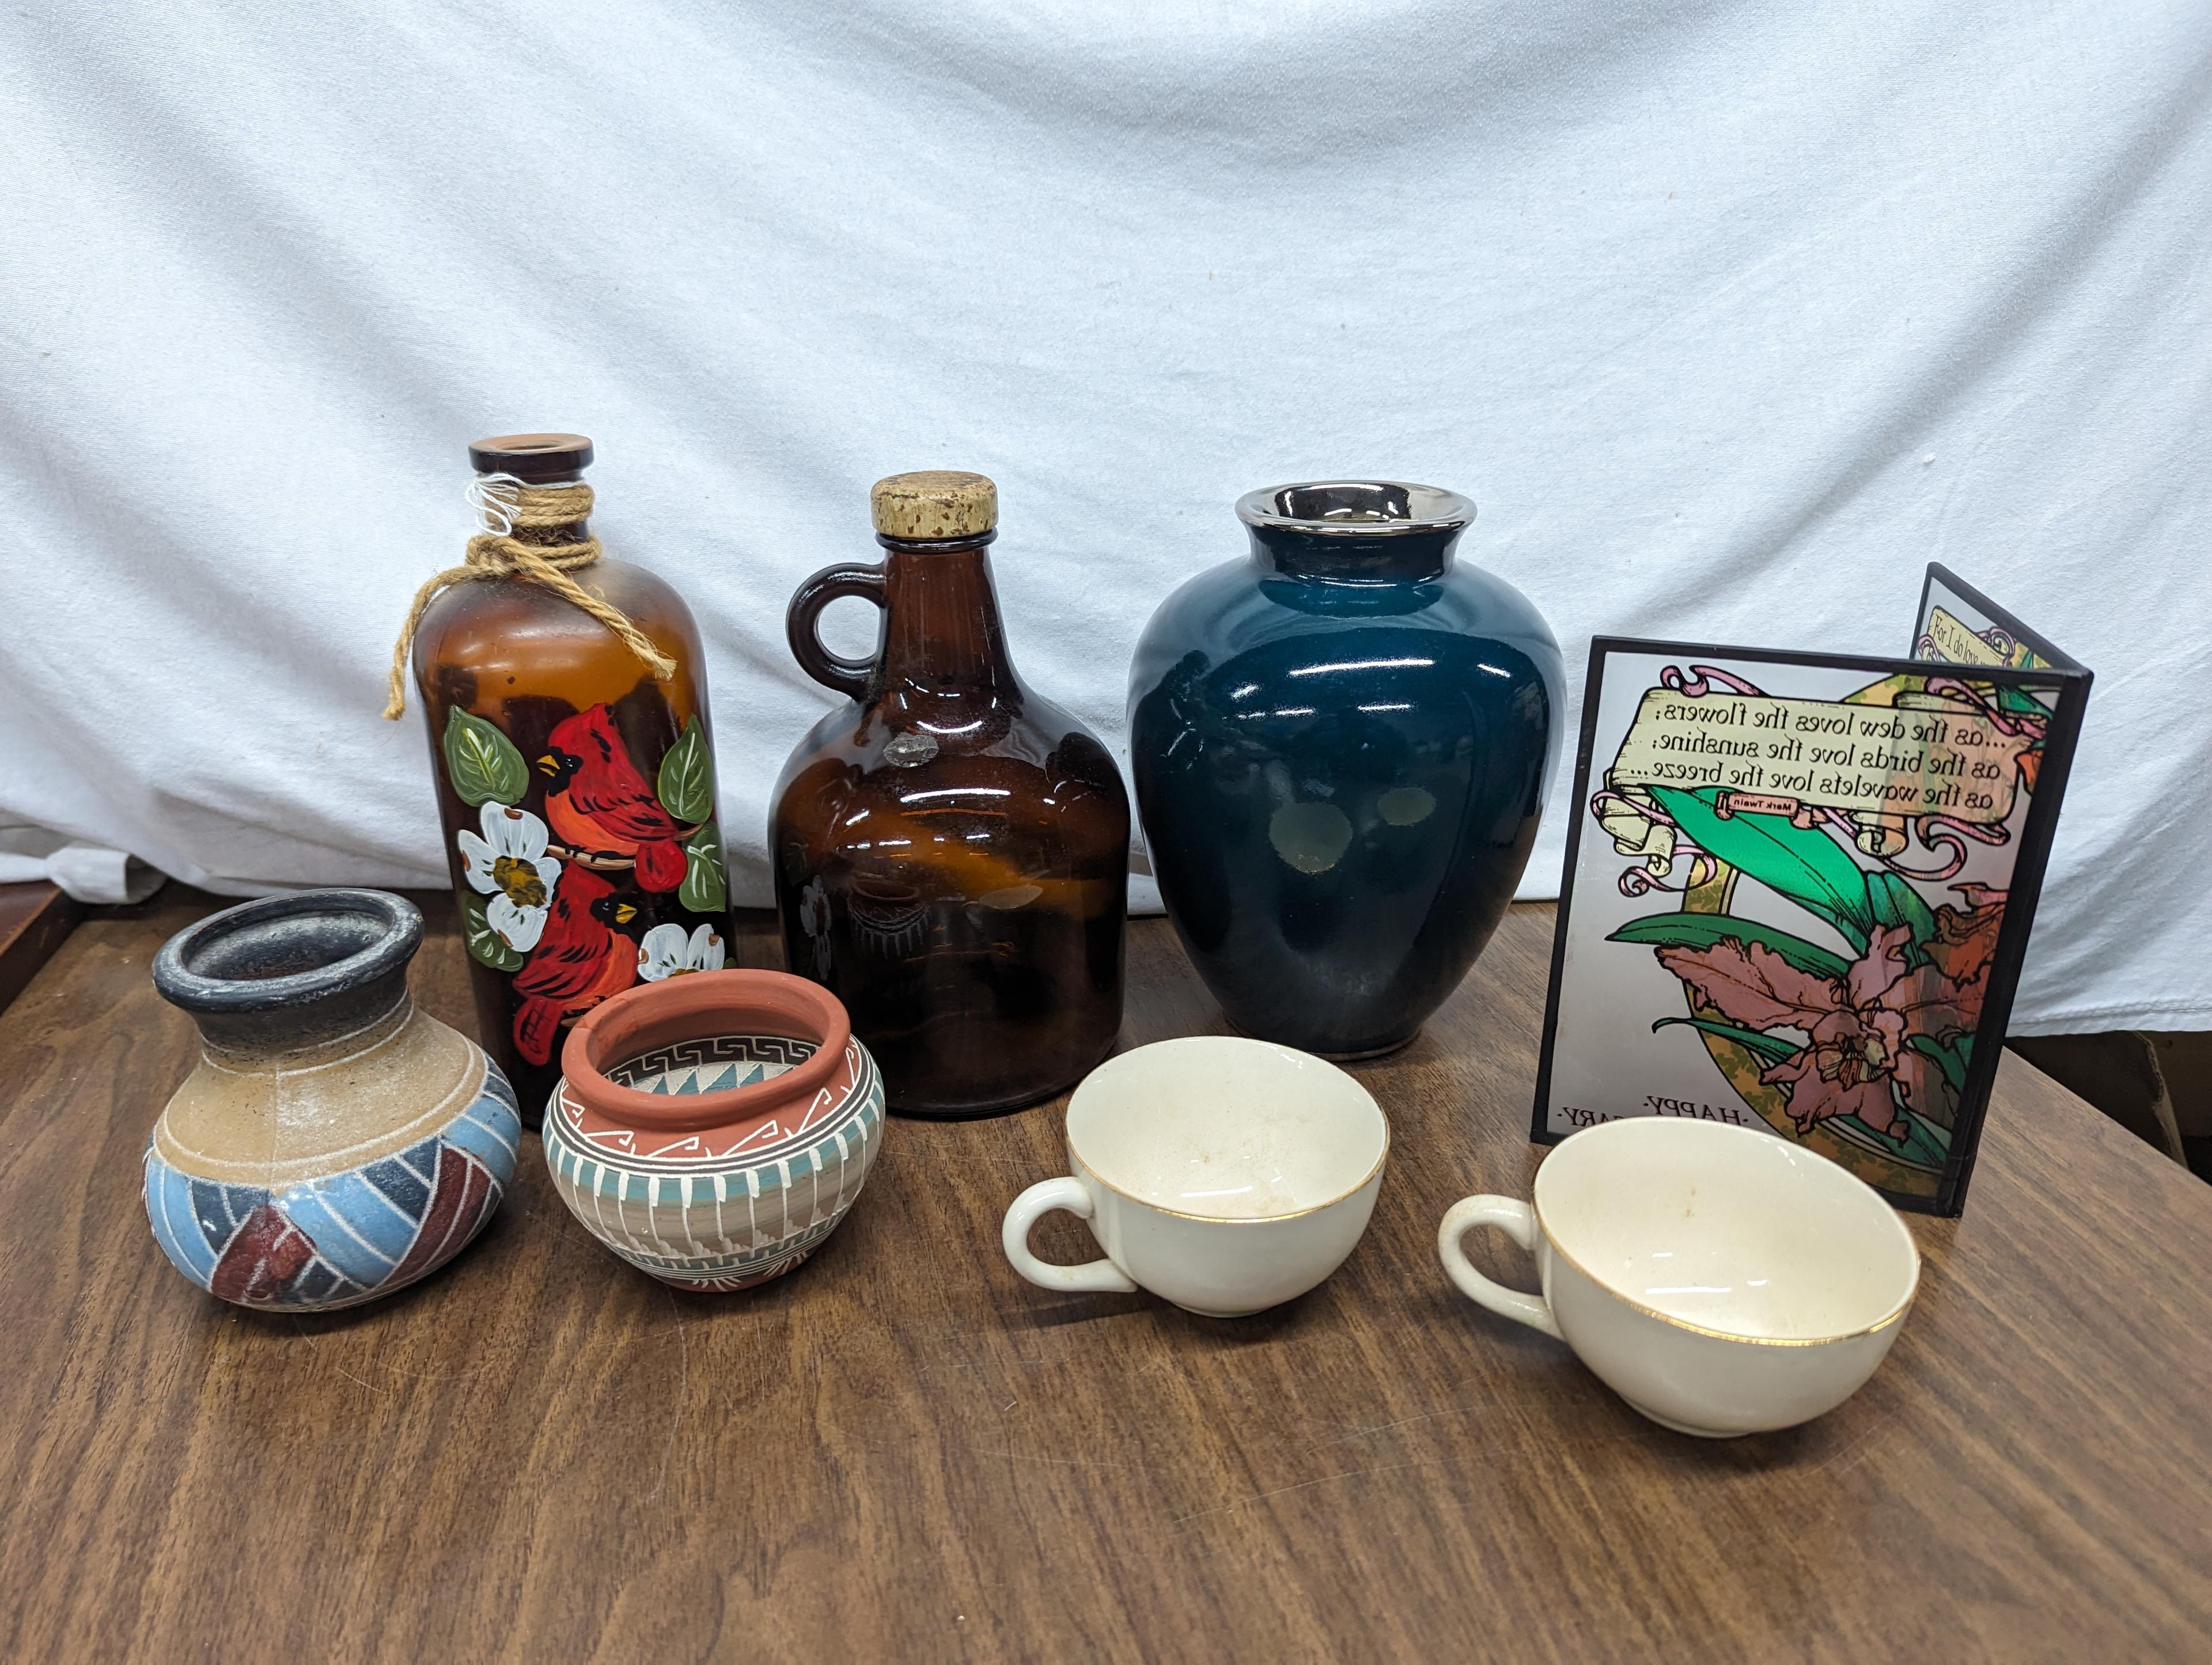 Vases, Jugs, Mini Stained Glass